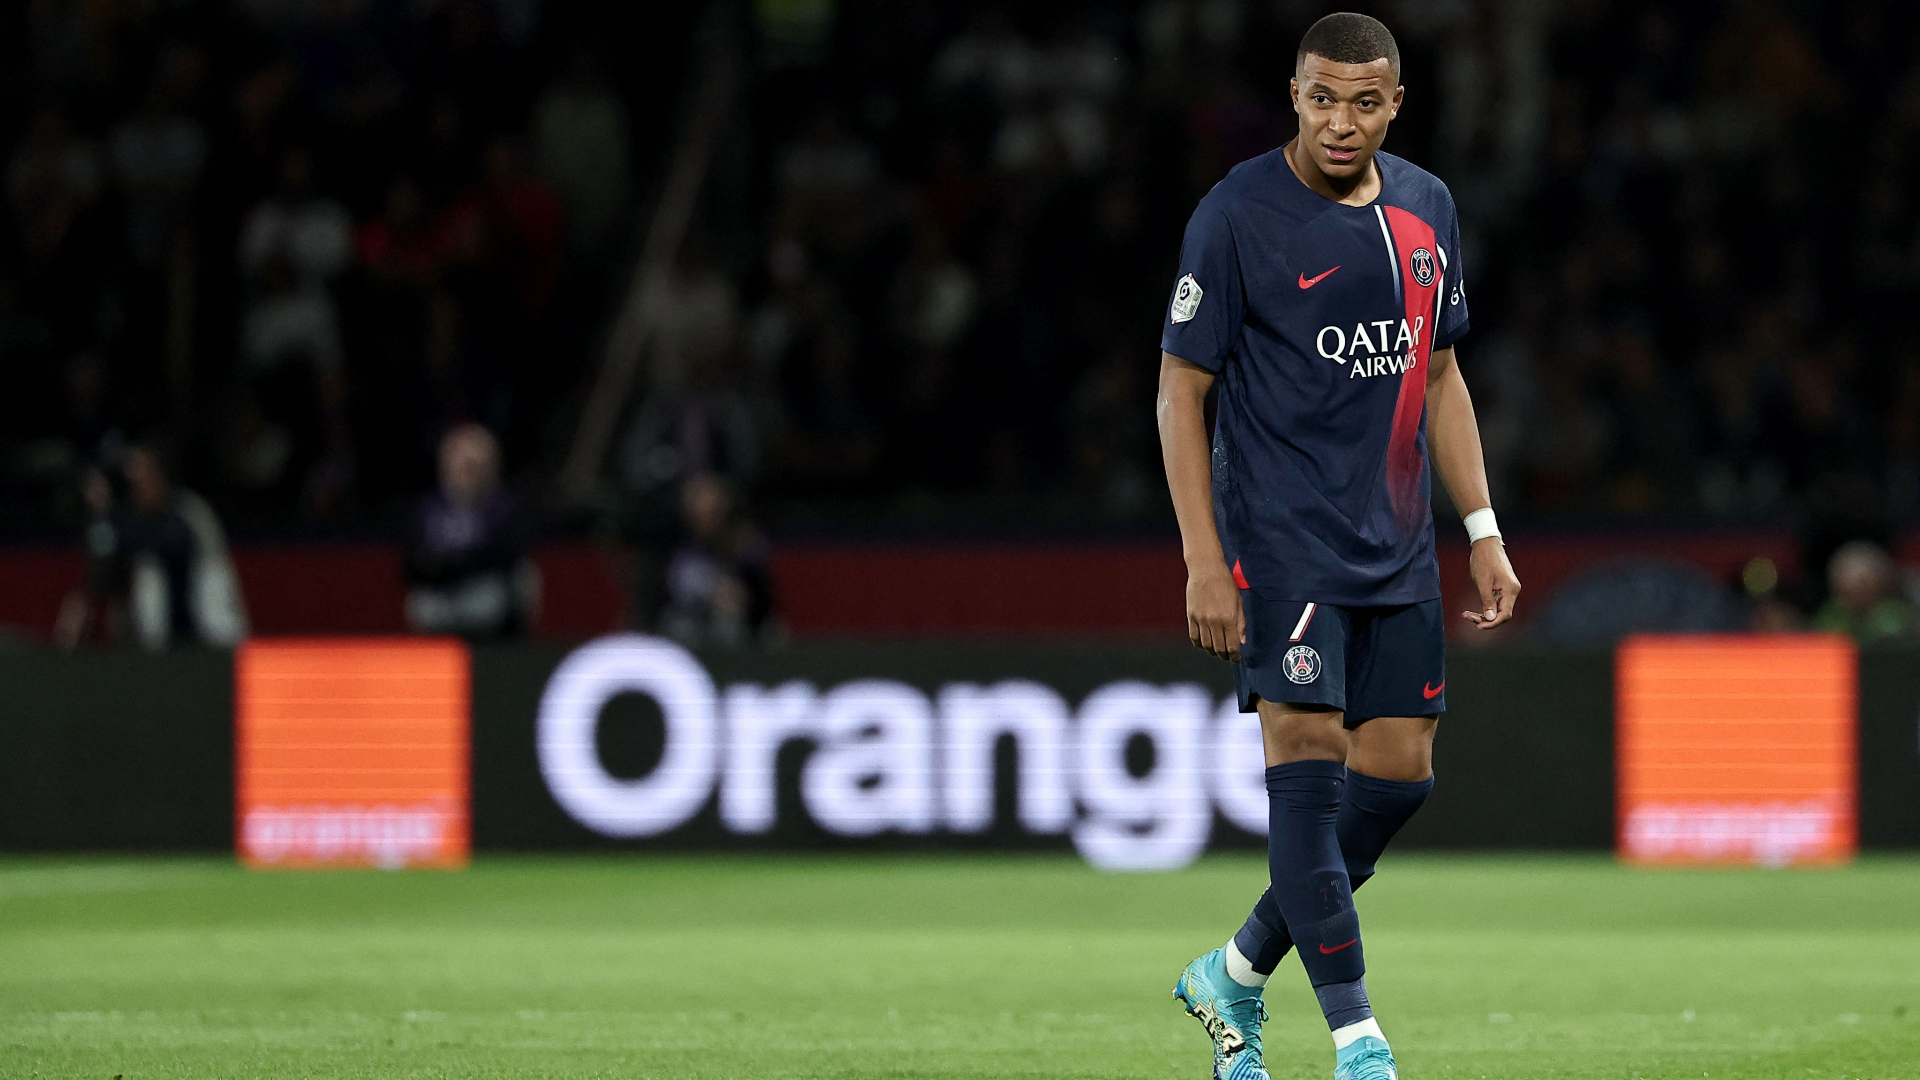 PSG's Plan Emerges in Response to Real Madrid's Pursuit of Mbappé